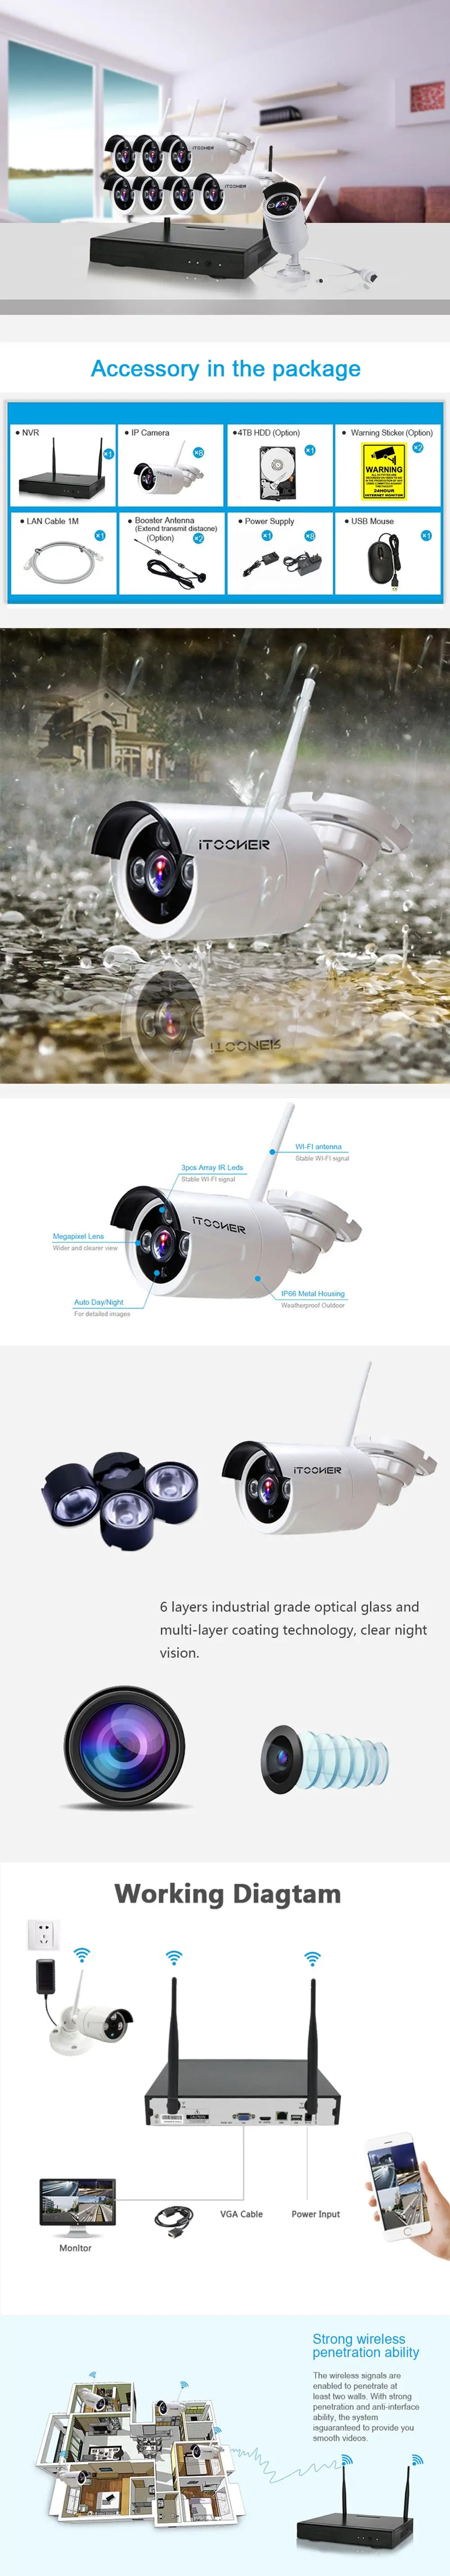 【8CH Expandable·Audio】 All in One Monitor Wireless Security Camera System,Home Surveillance Video Camera Kits with 10 HD Screen,4Pcs Outdoor/Indoor CCTV WiFi Cameras,1TB HDD Waterproof,Remote View 